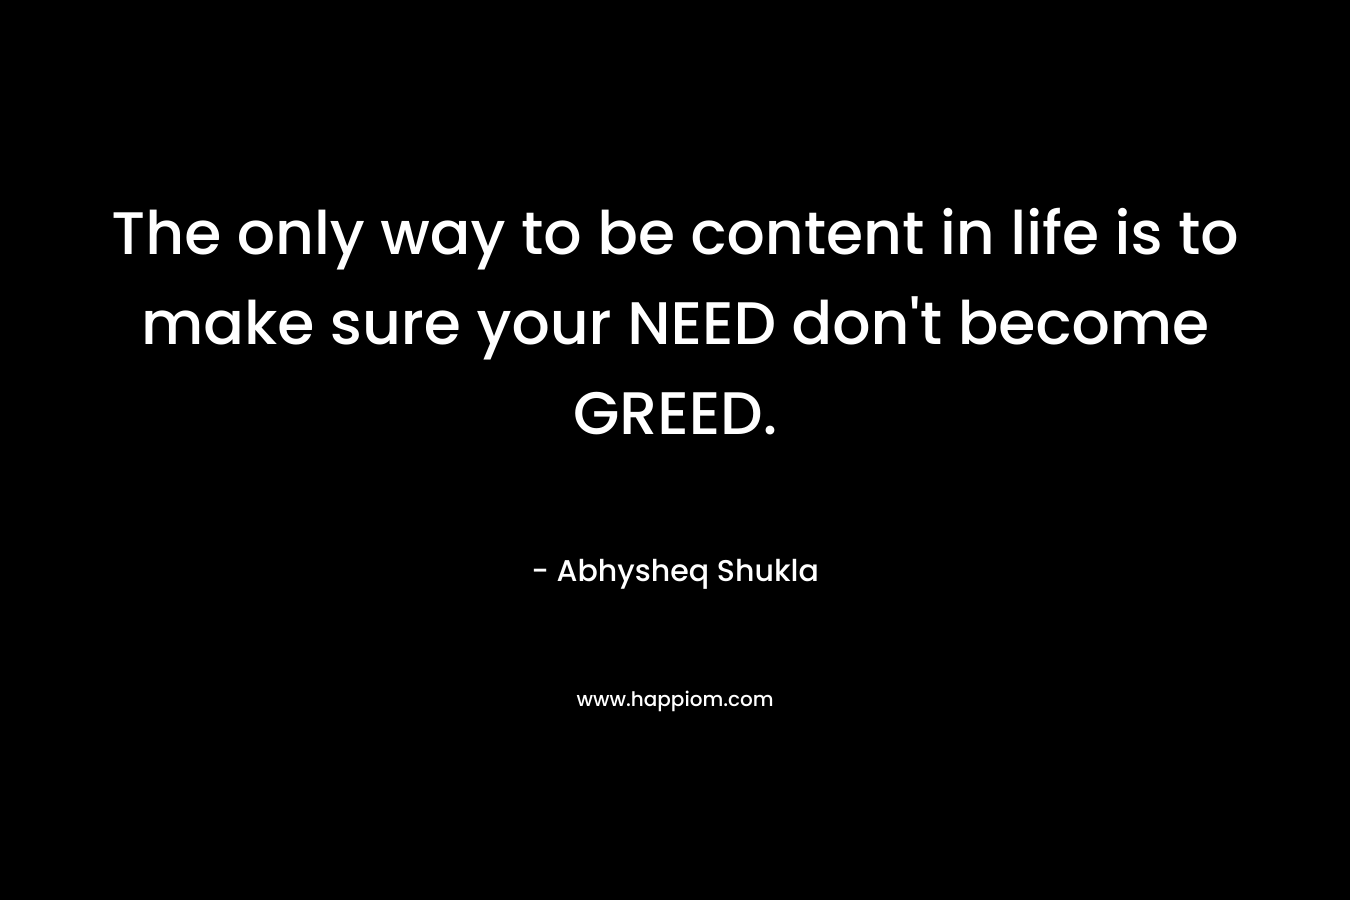 The only way to be content in life is to make sure your NEED don't become GREED.